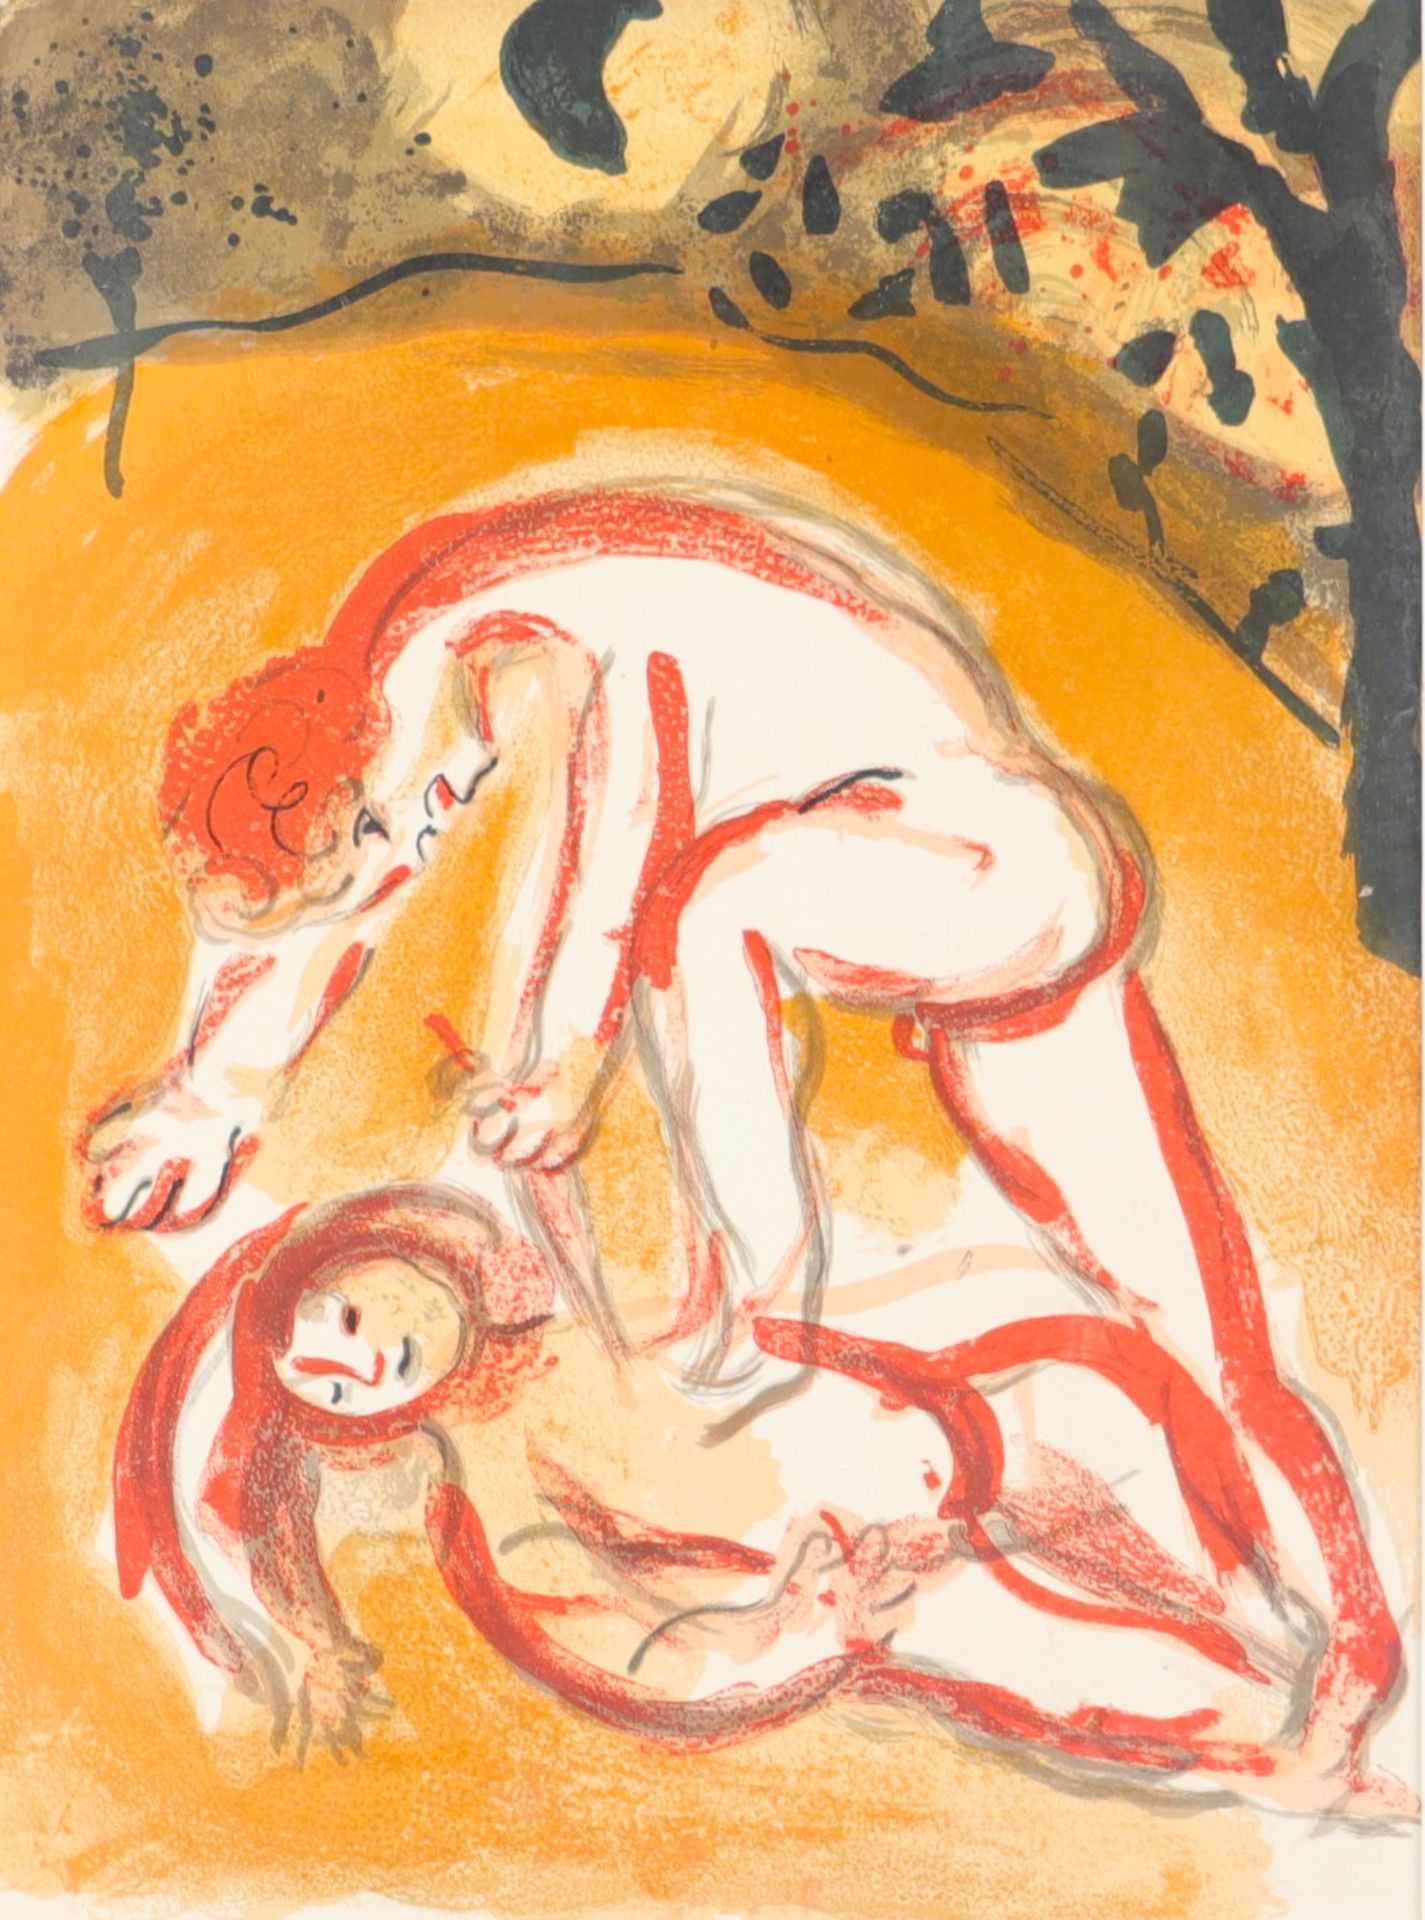 Marc CHAGALL (1887-1985) Lithograph "Cain and Abel"